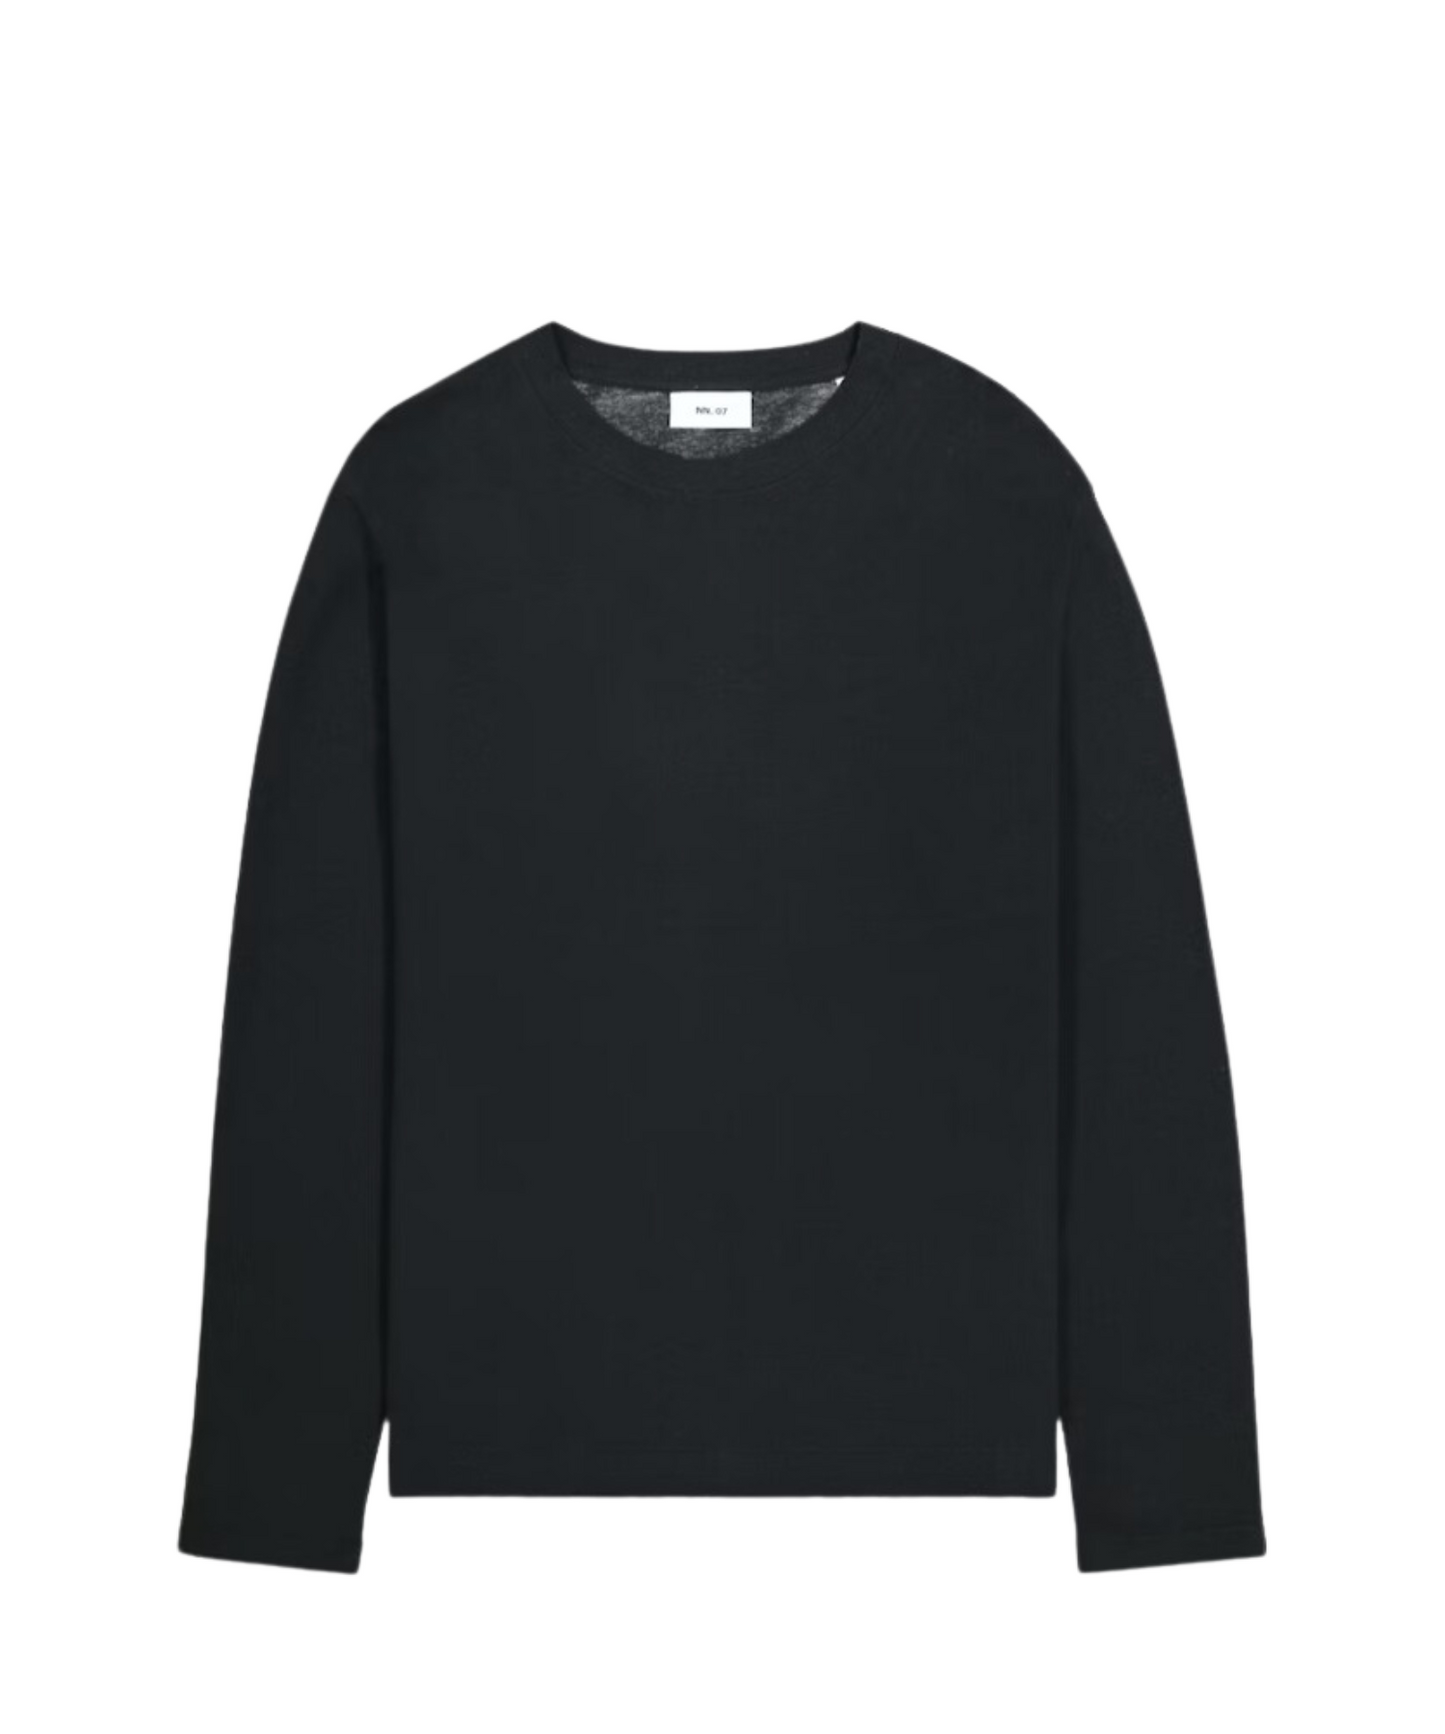 Clive Long Sleeve Tee